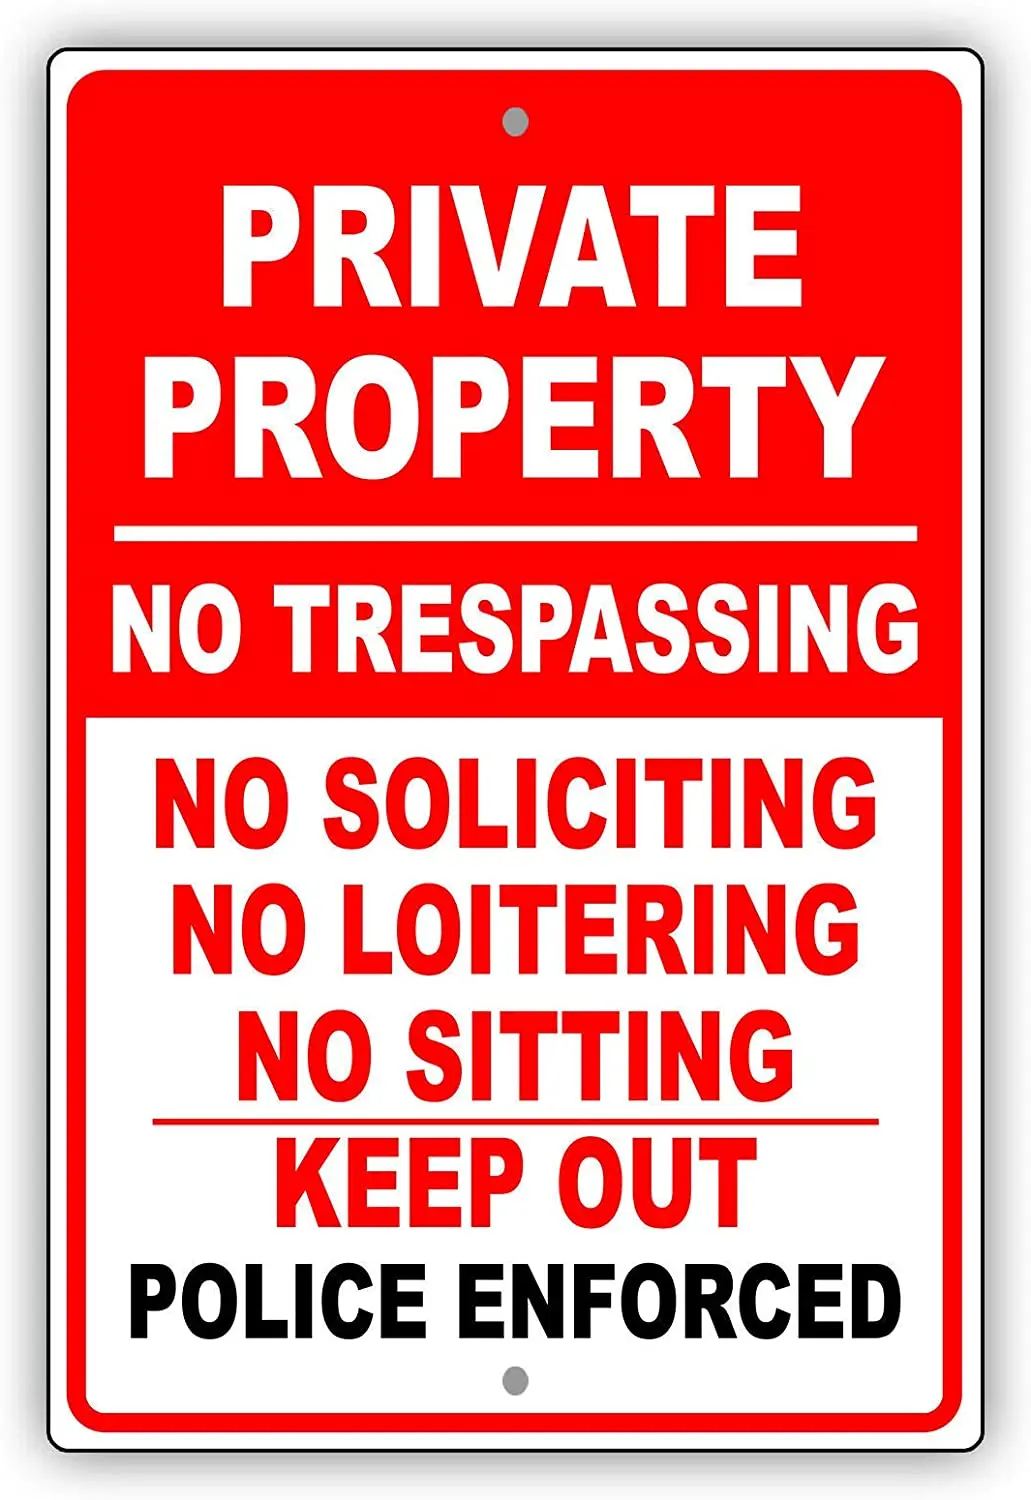 

Afterprints Private Property No Trespassing No Soliciting Keep Out Unique Novelty Alert Warning Notice Aluminum Metal Sign 8"x12